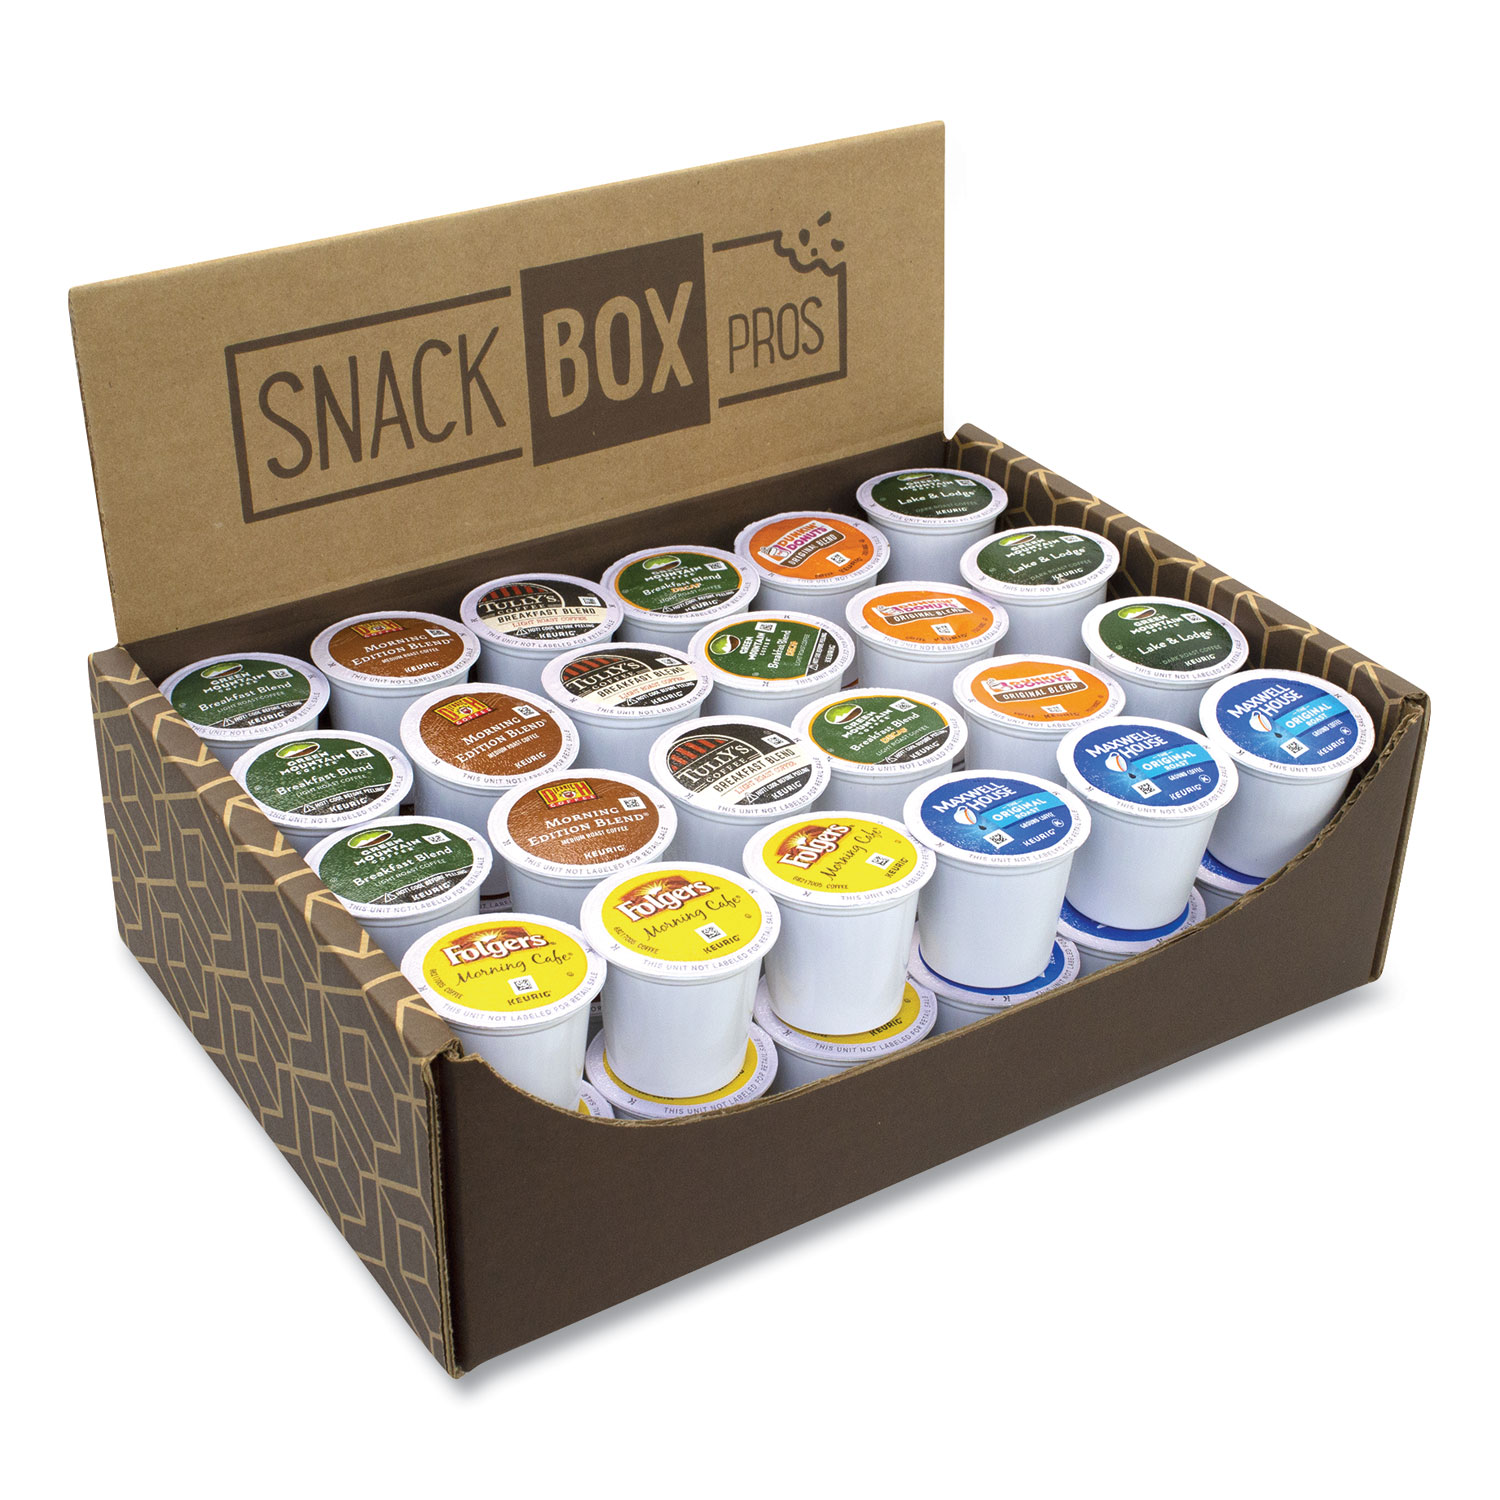  Snack Box Pros 70000039 What's for Breakfast K-Cup Assortment, 48/Box, Free Delivery in 1-4 Business Days (GRR70000039) 